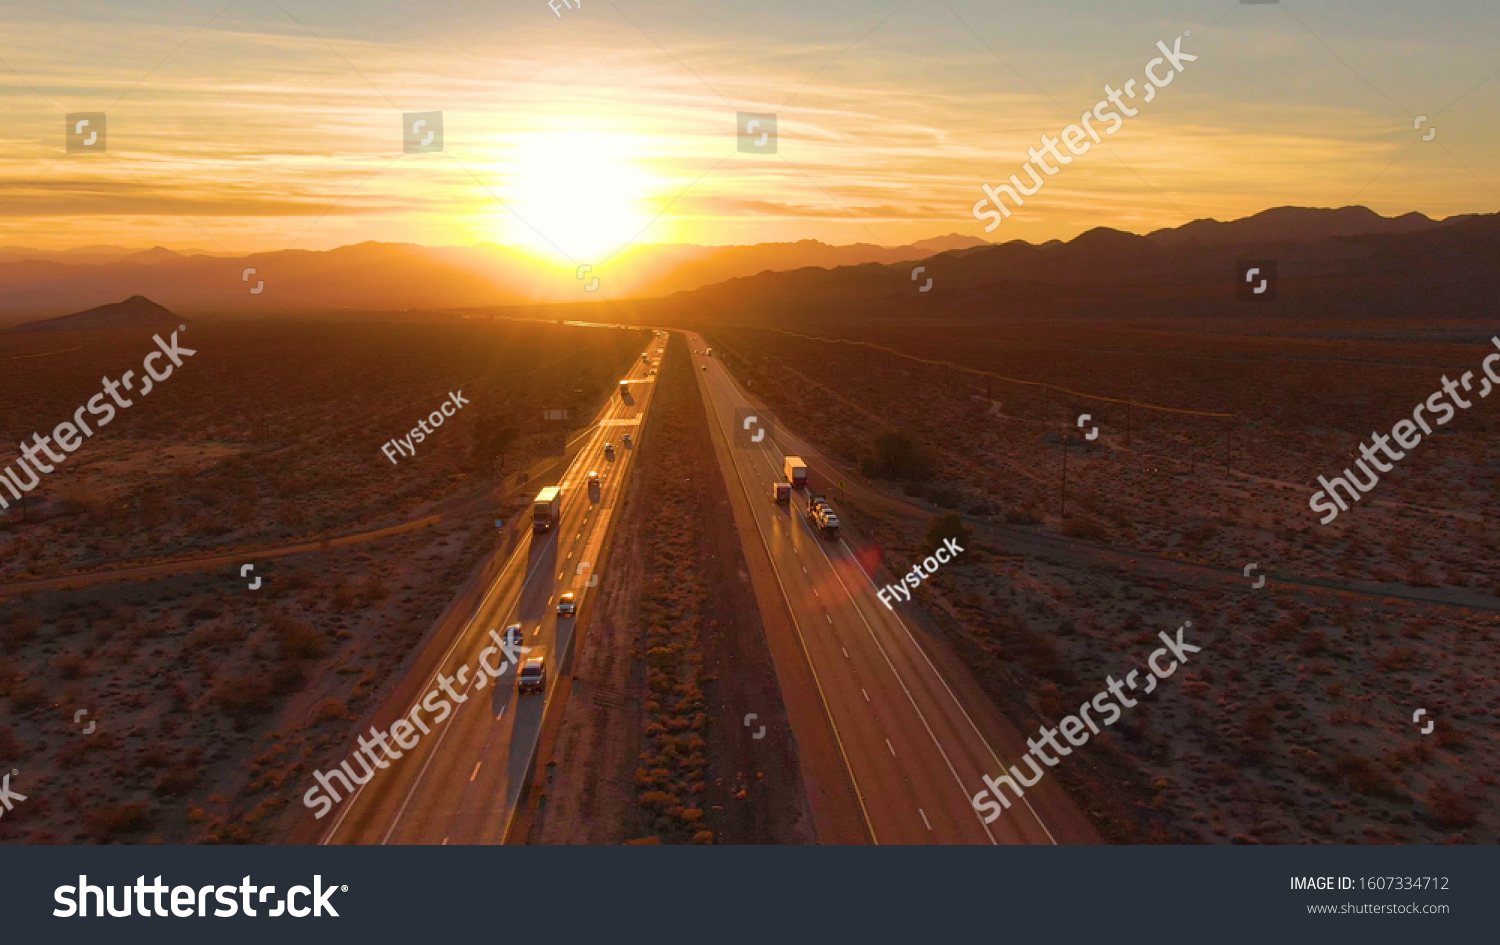 DRONE, SUN FLARE: Scenic shot of 18 wheeler trucks and cars crossing Mojave desert at dusk. Golden evening sun rays shine on the traffic moving up and down the straight freeway in rural California. #1607334712